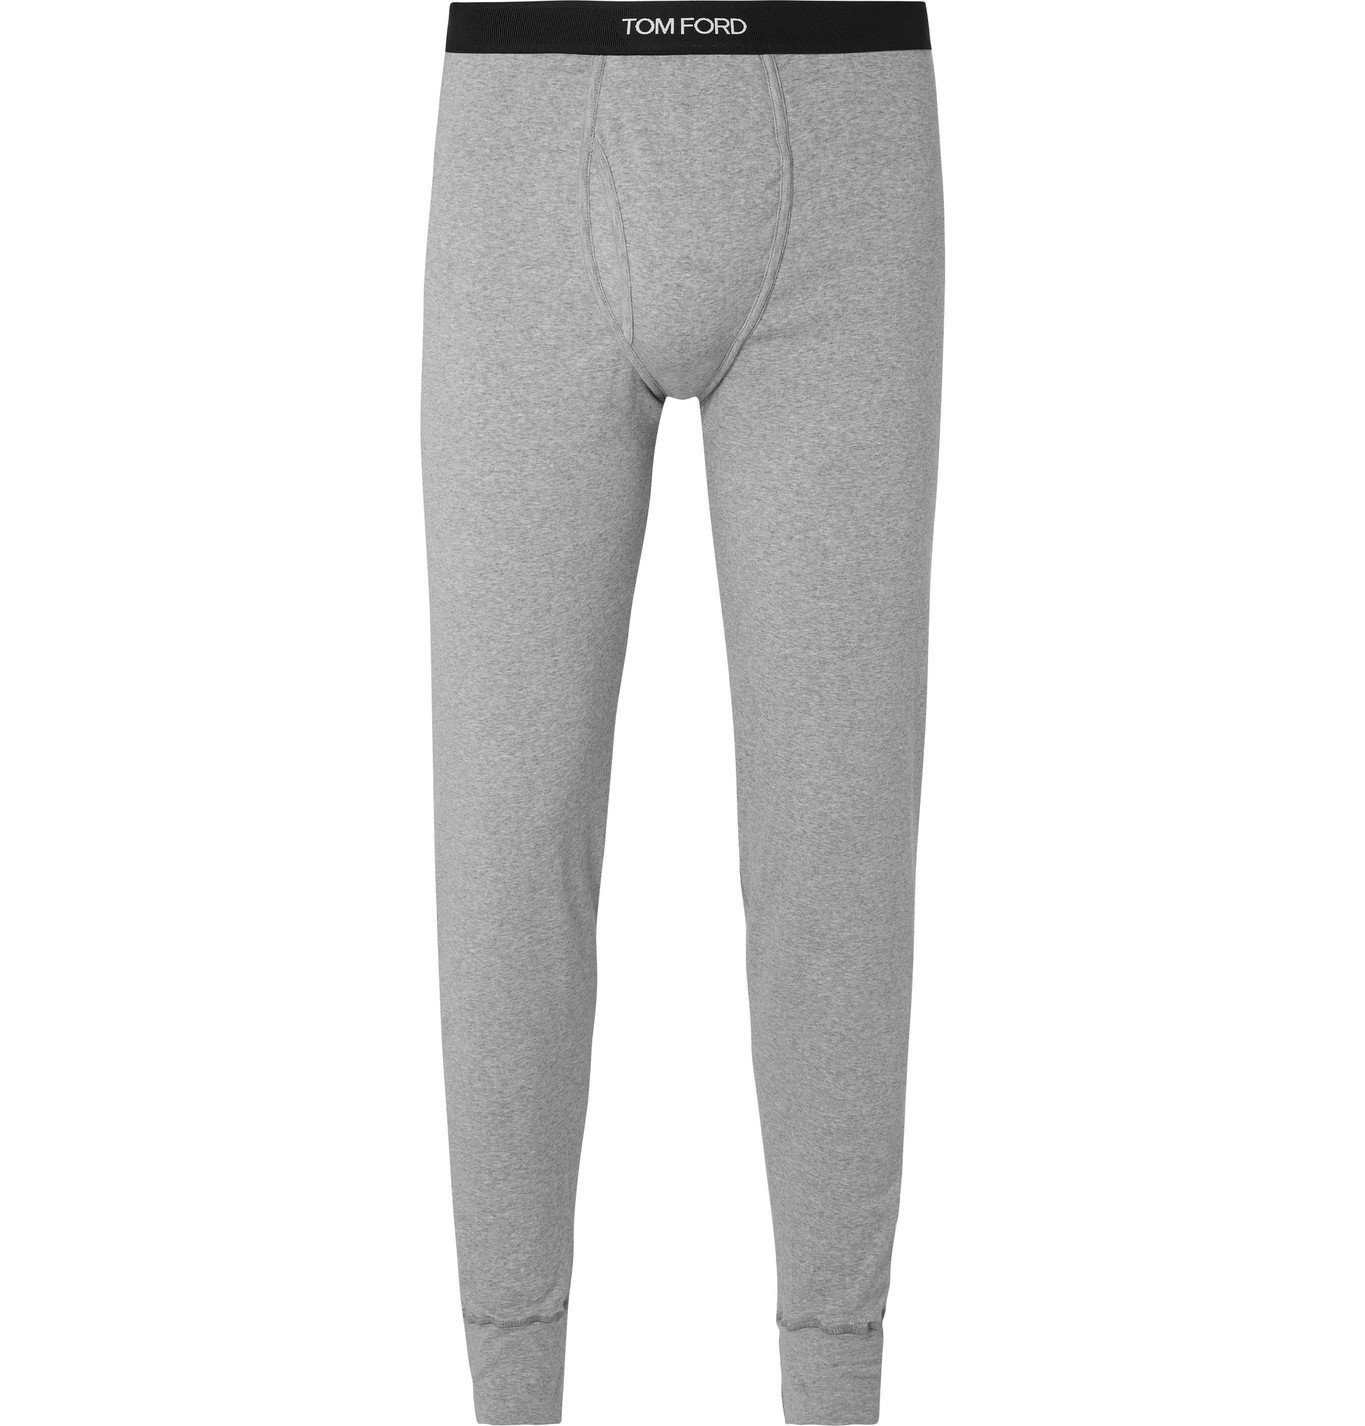 TOM FORD - Slim-Fit Mélange Stretch-Cotton Jersey Long Johns - Gray TOM FORD